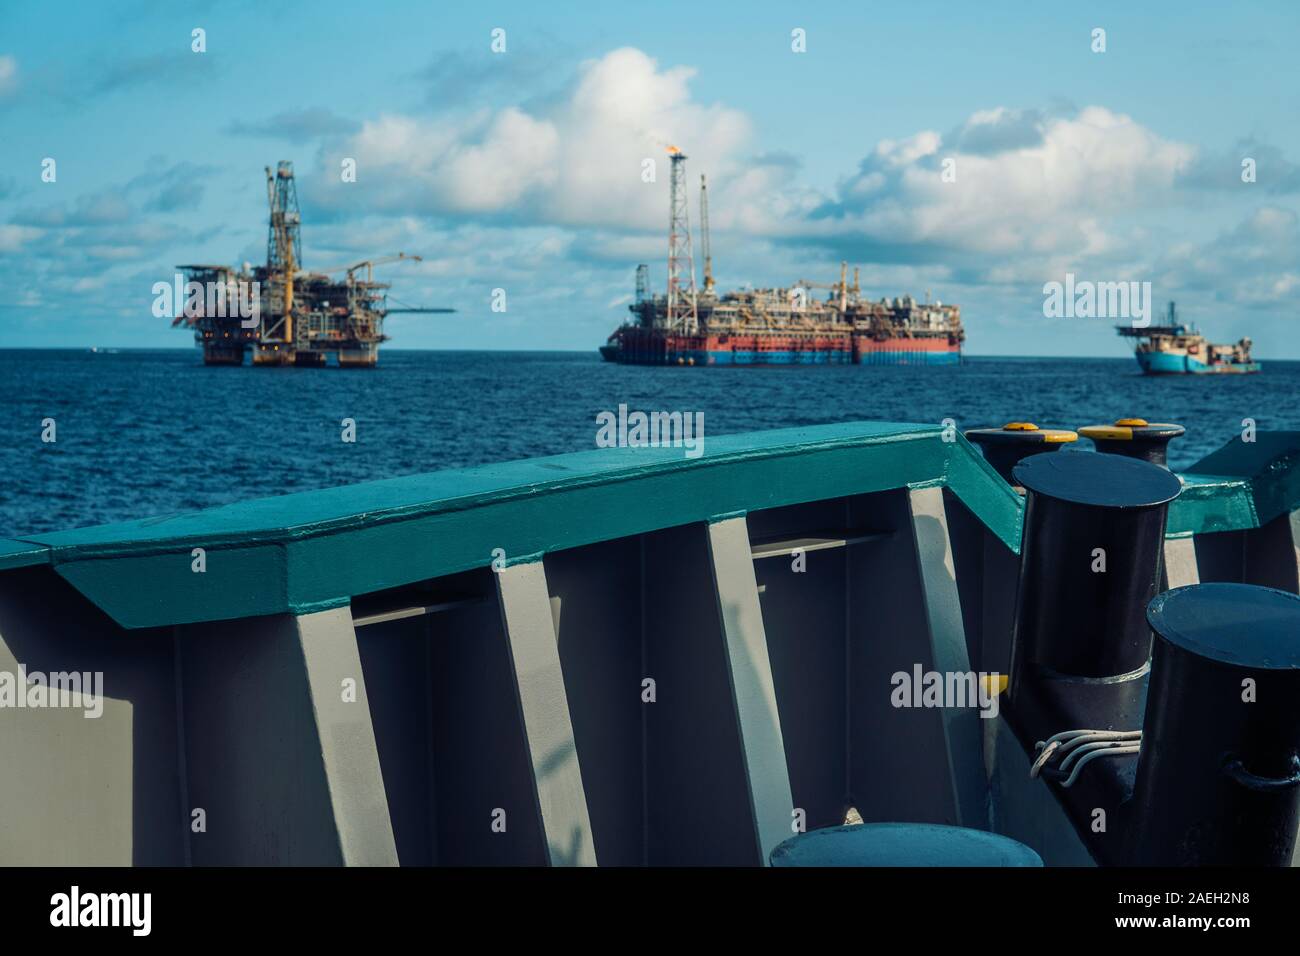 FPSO tanker vessel near Oil Rig platform. Offshore oil and gas industry Stock Photo